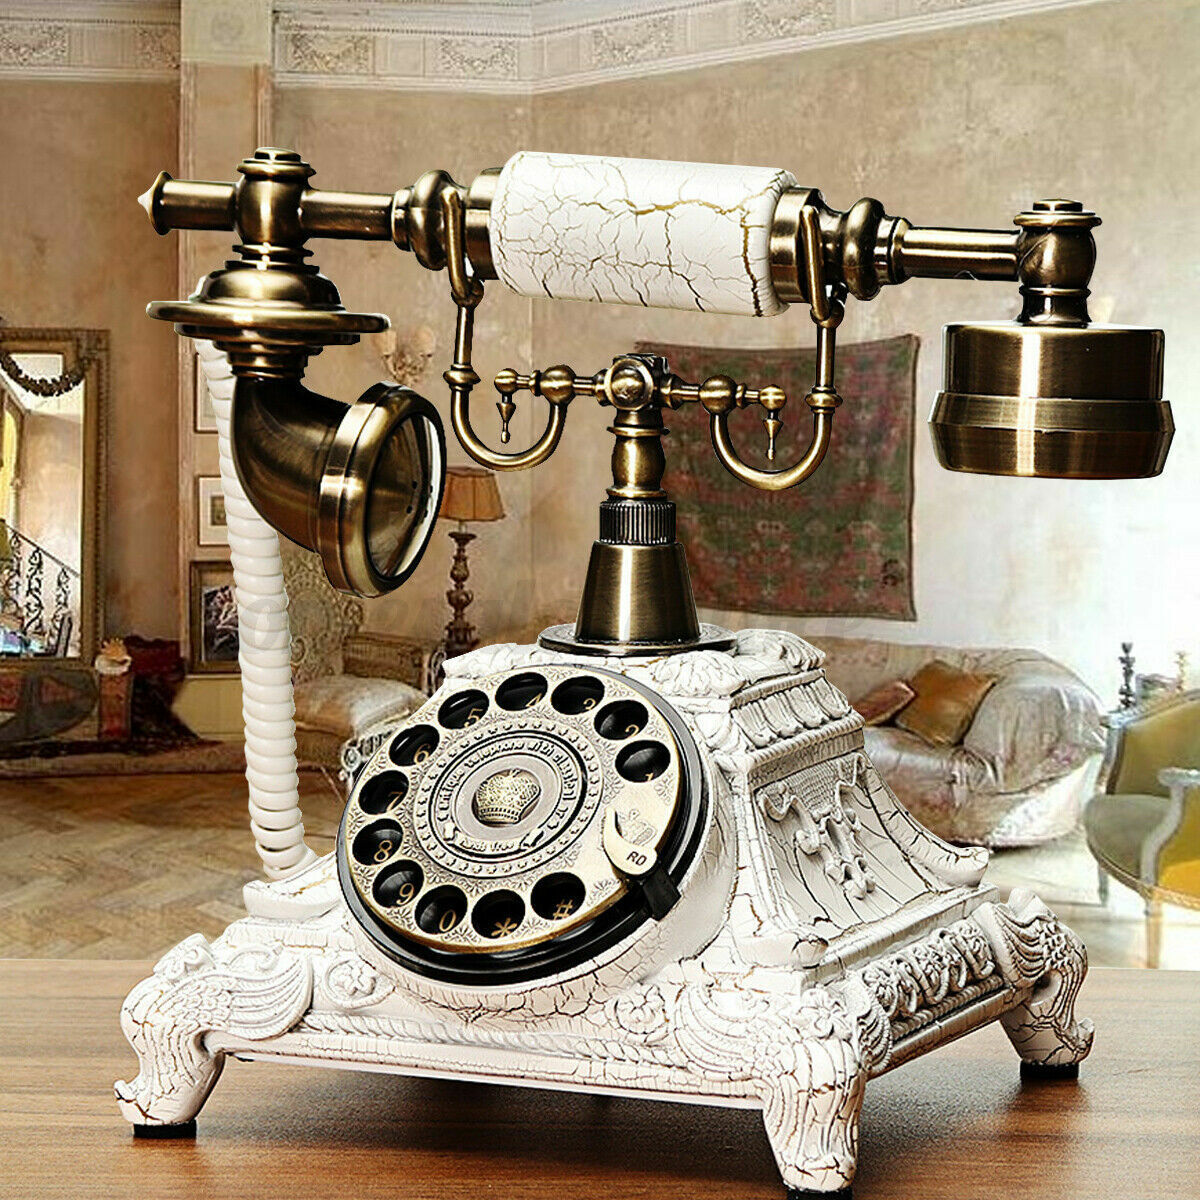 Rotary Vintage Style Antique Telephone Corded Retro Dial Phone Home Office Desk